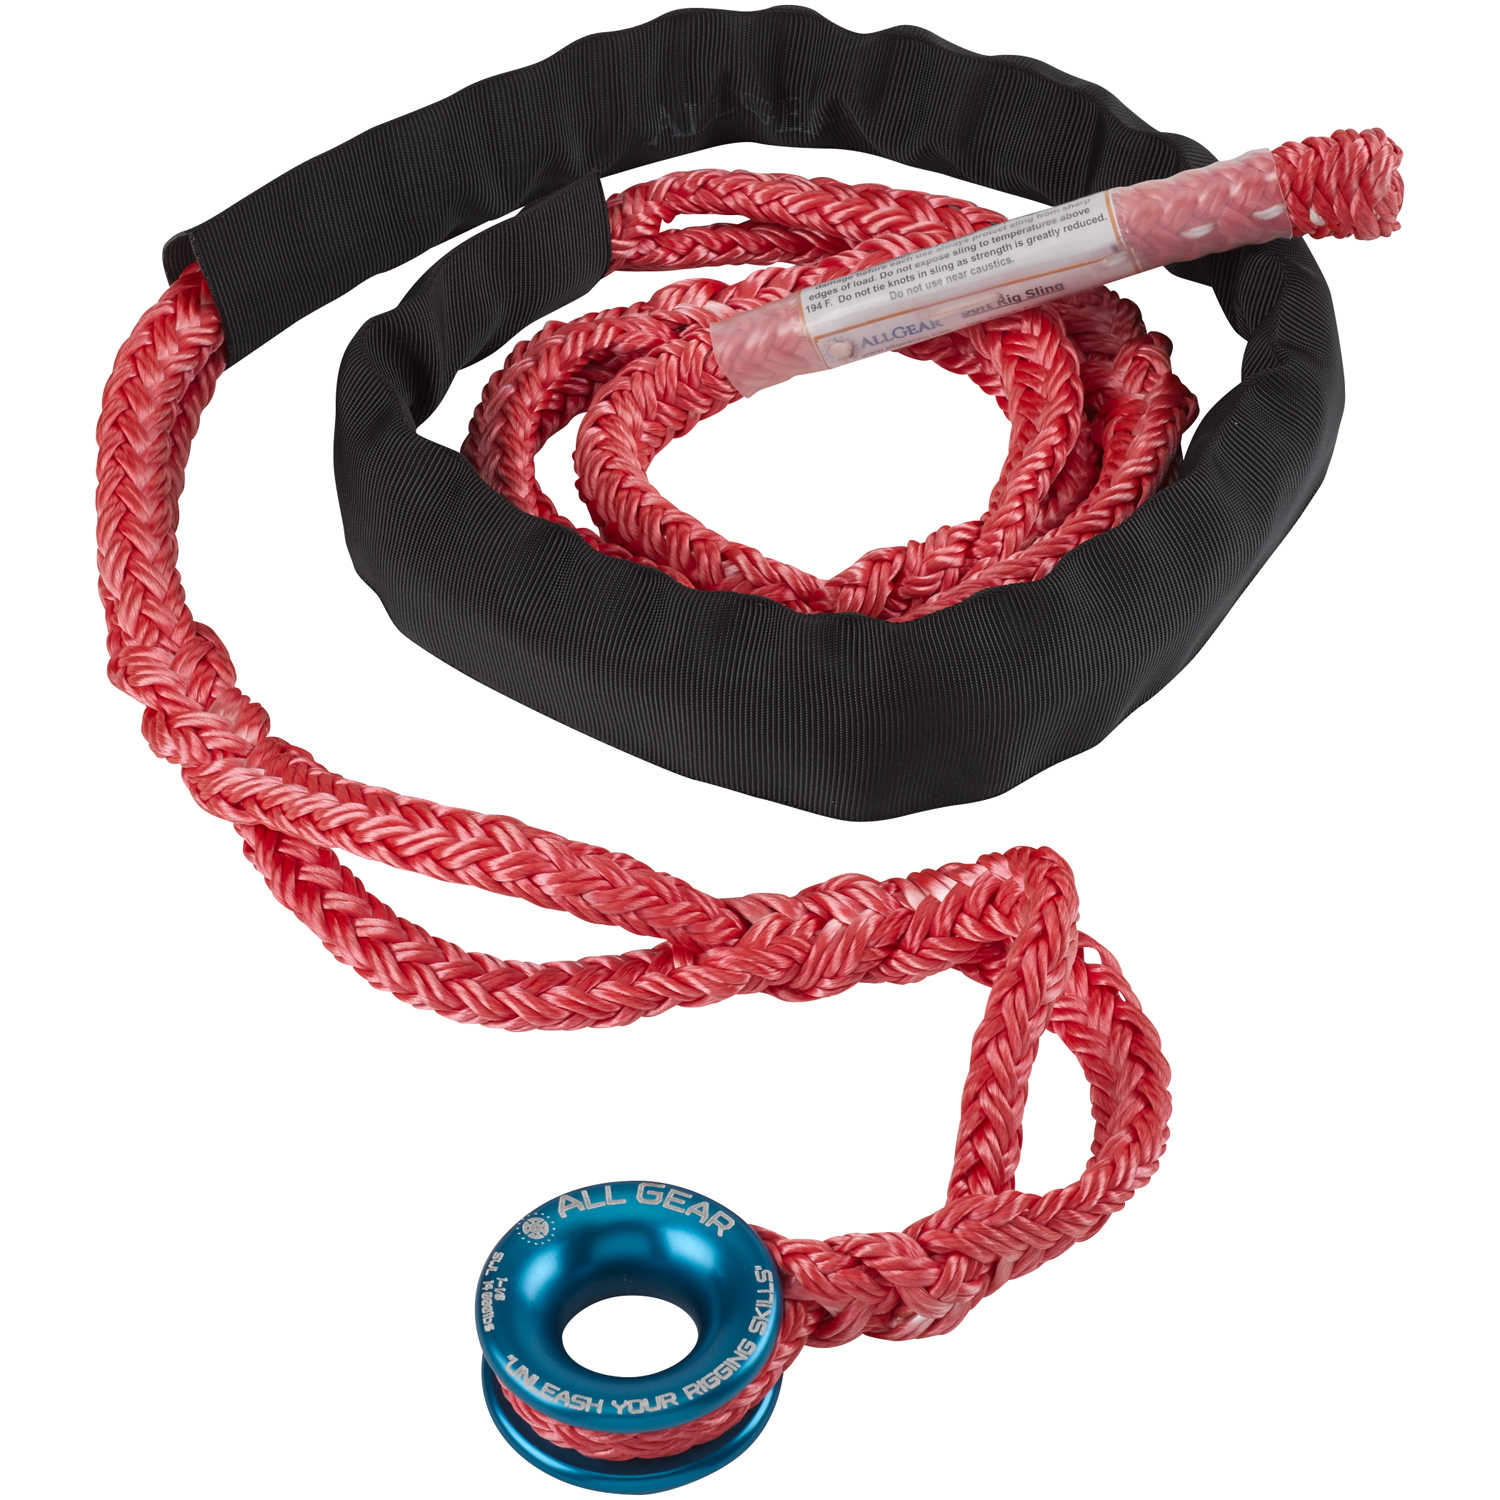 All Gear AGSRS12S-128 Rope Sling,red/blue,8 ft.